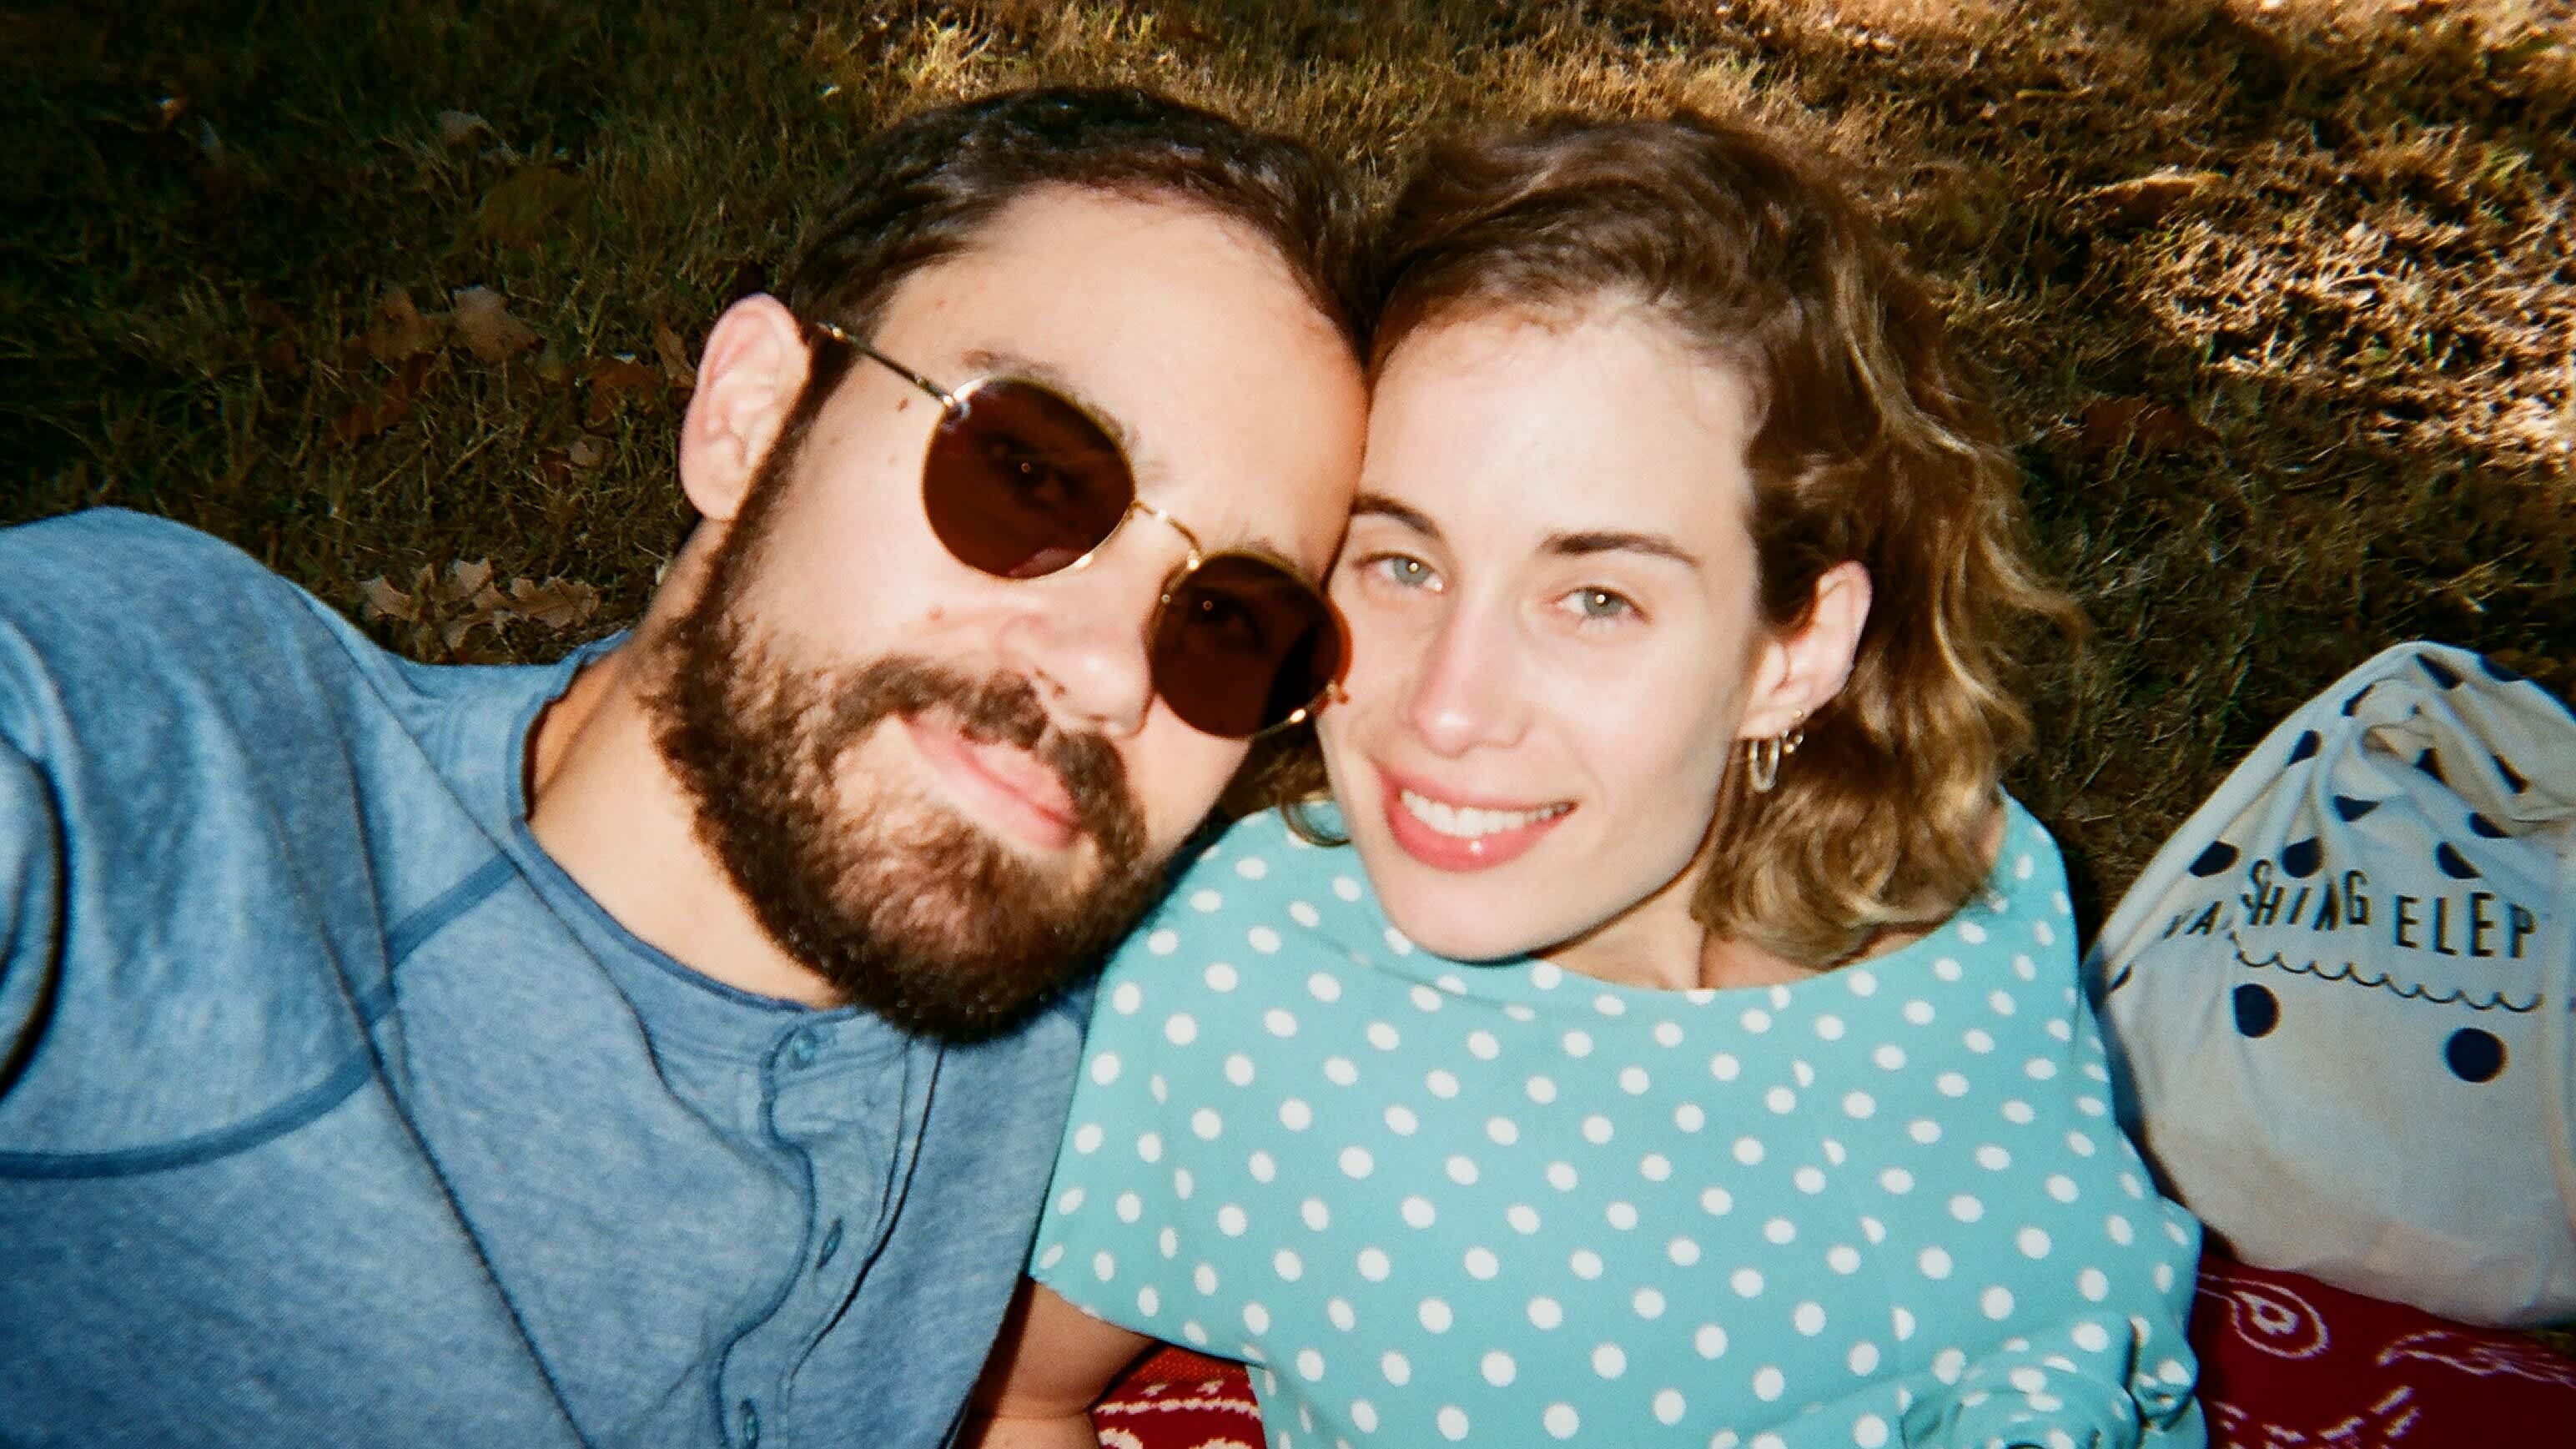 Lyft riders Jared and Anna pictured together on a picnic. 